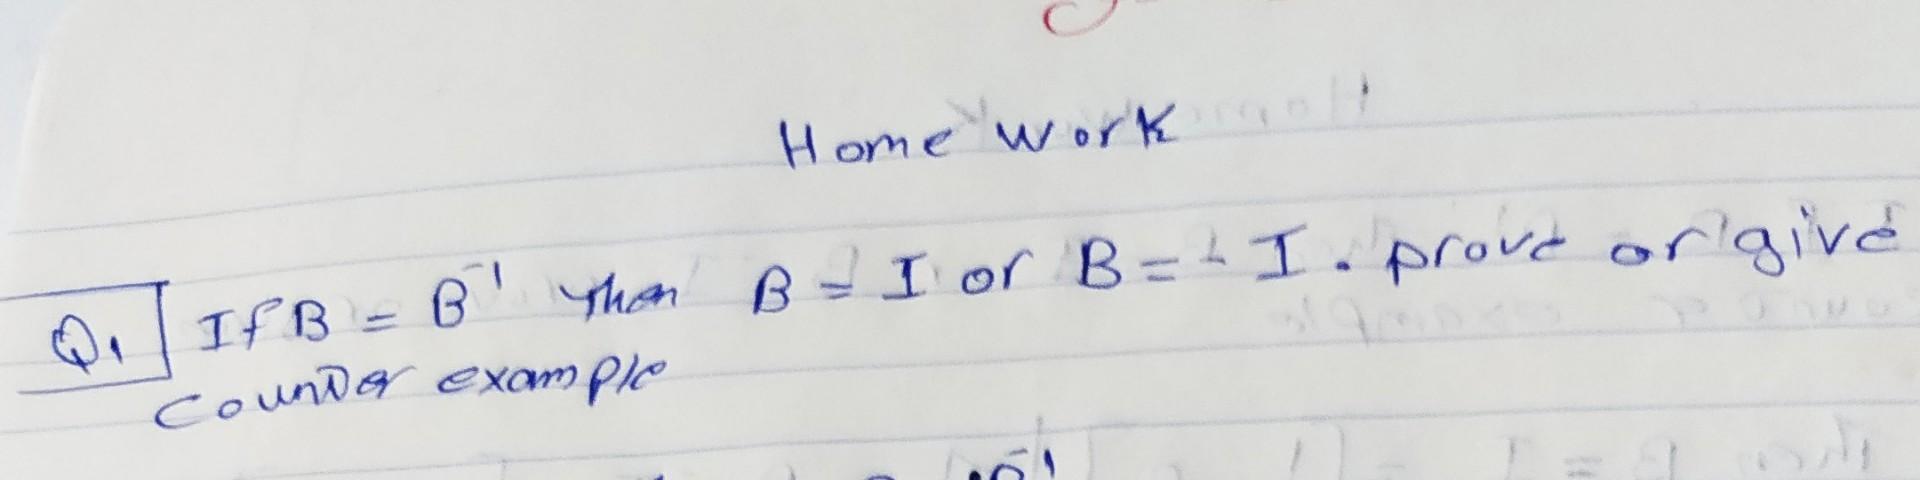 Home Work Int Q Ifb B Than B I Or B B I Or B 4i Prove Orgive Counder Example 1